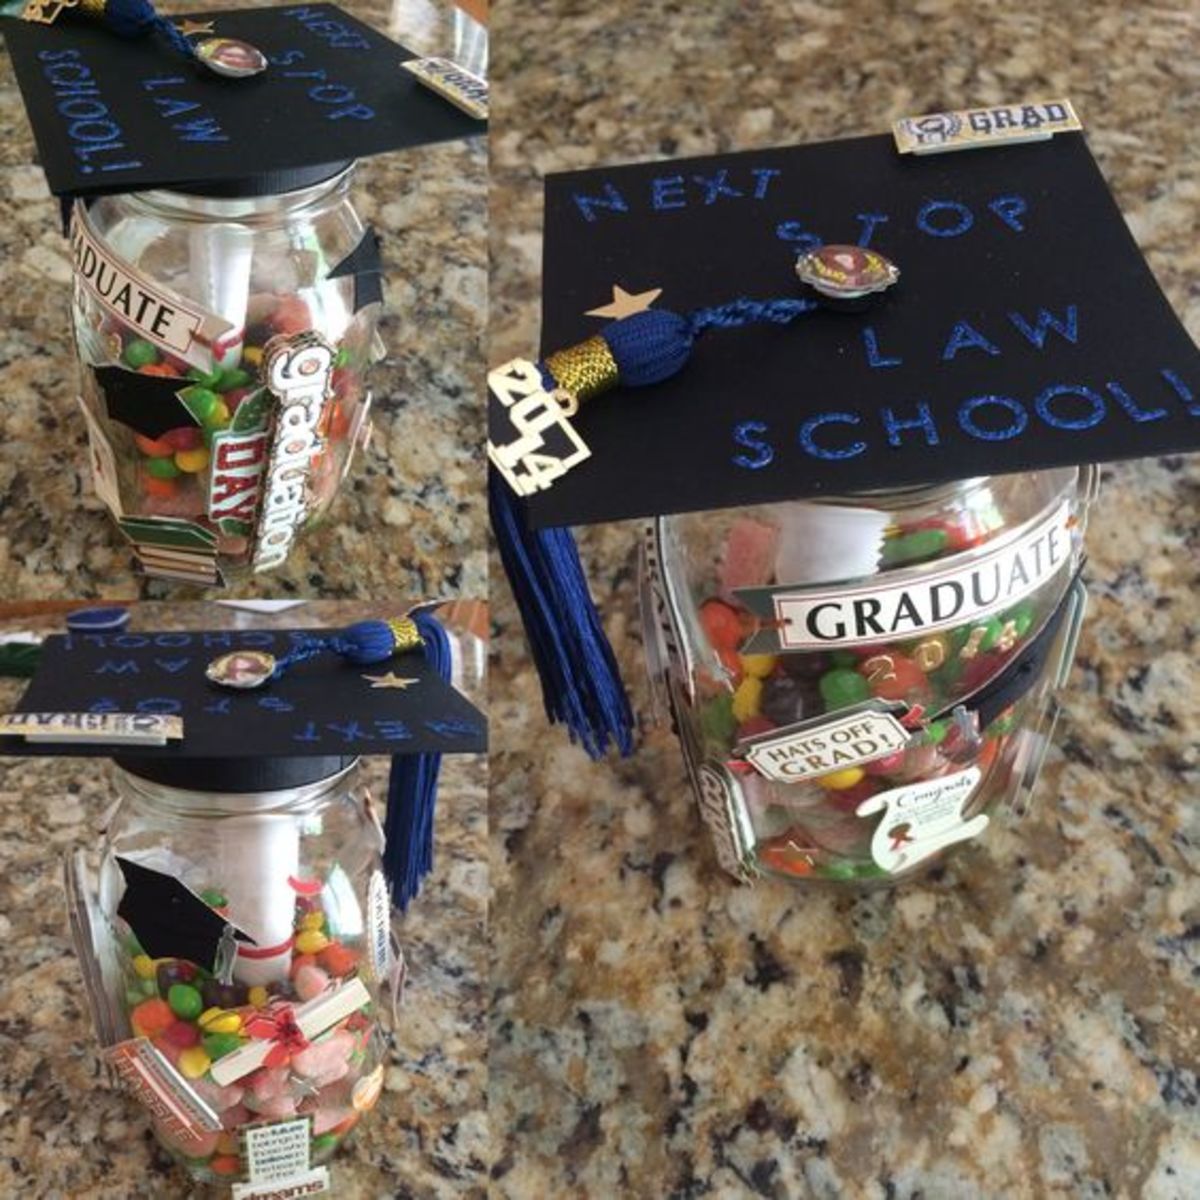 A jar of goodies for grads